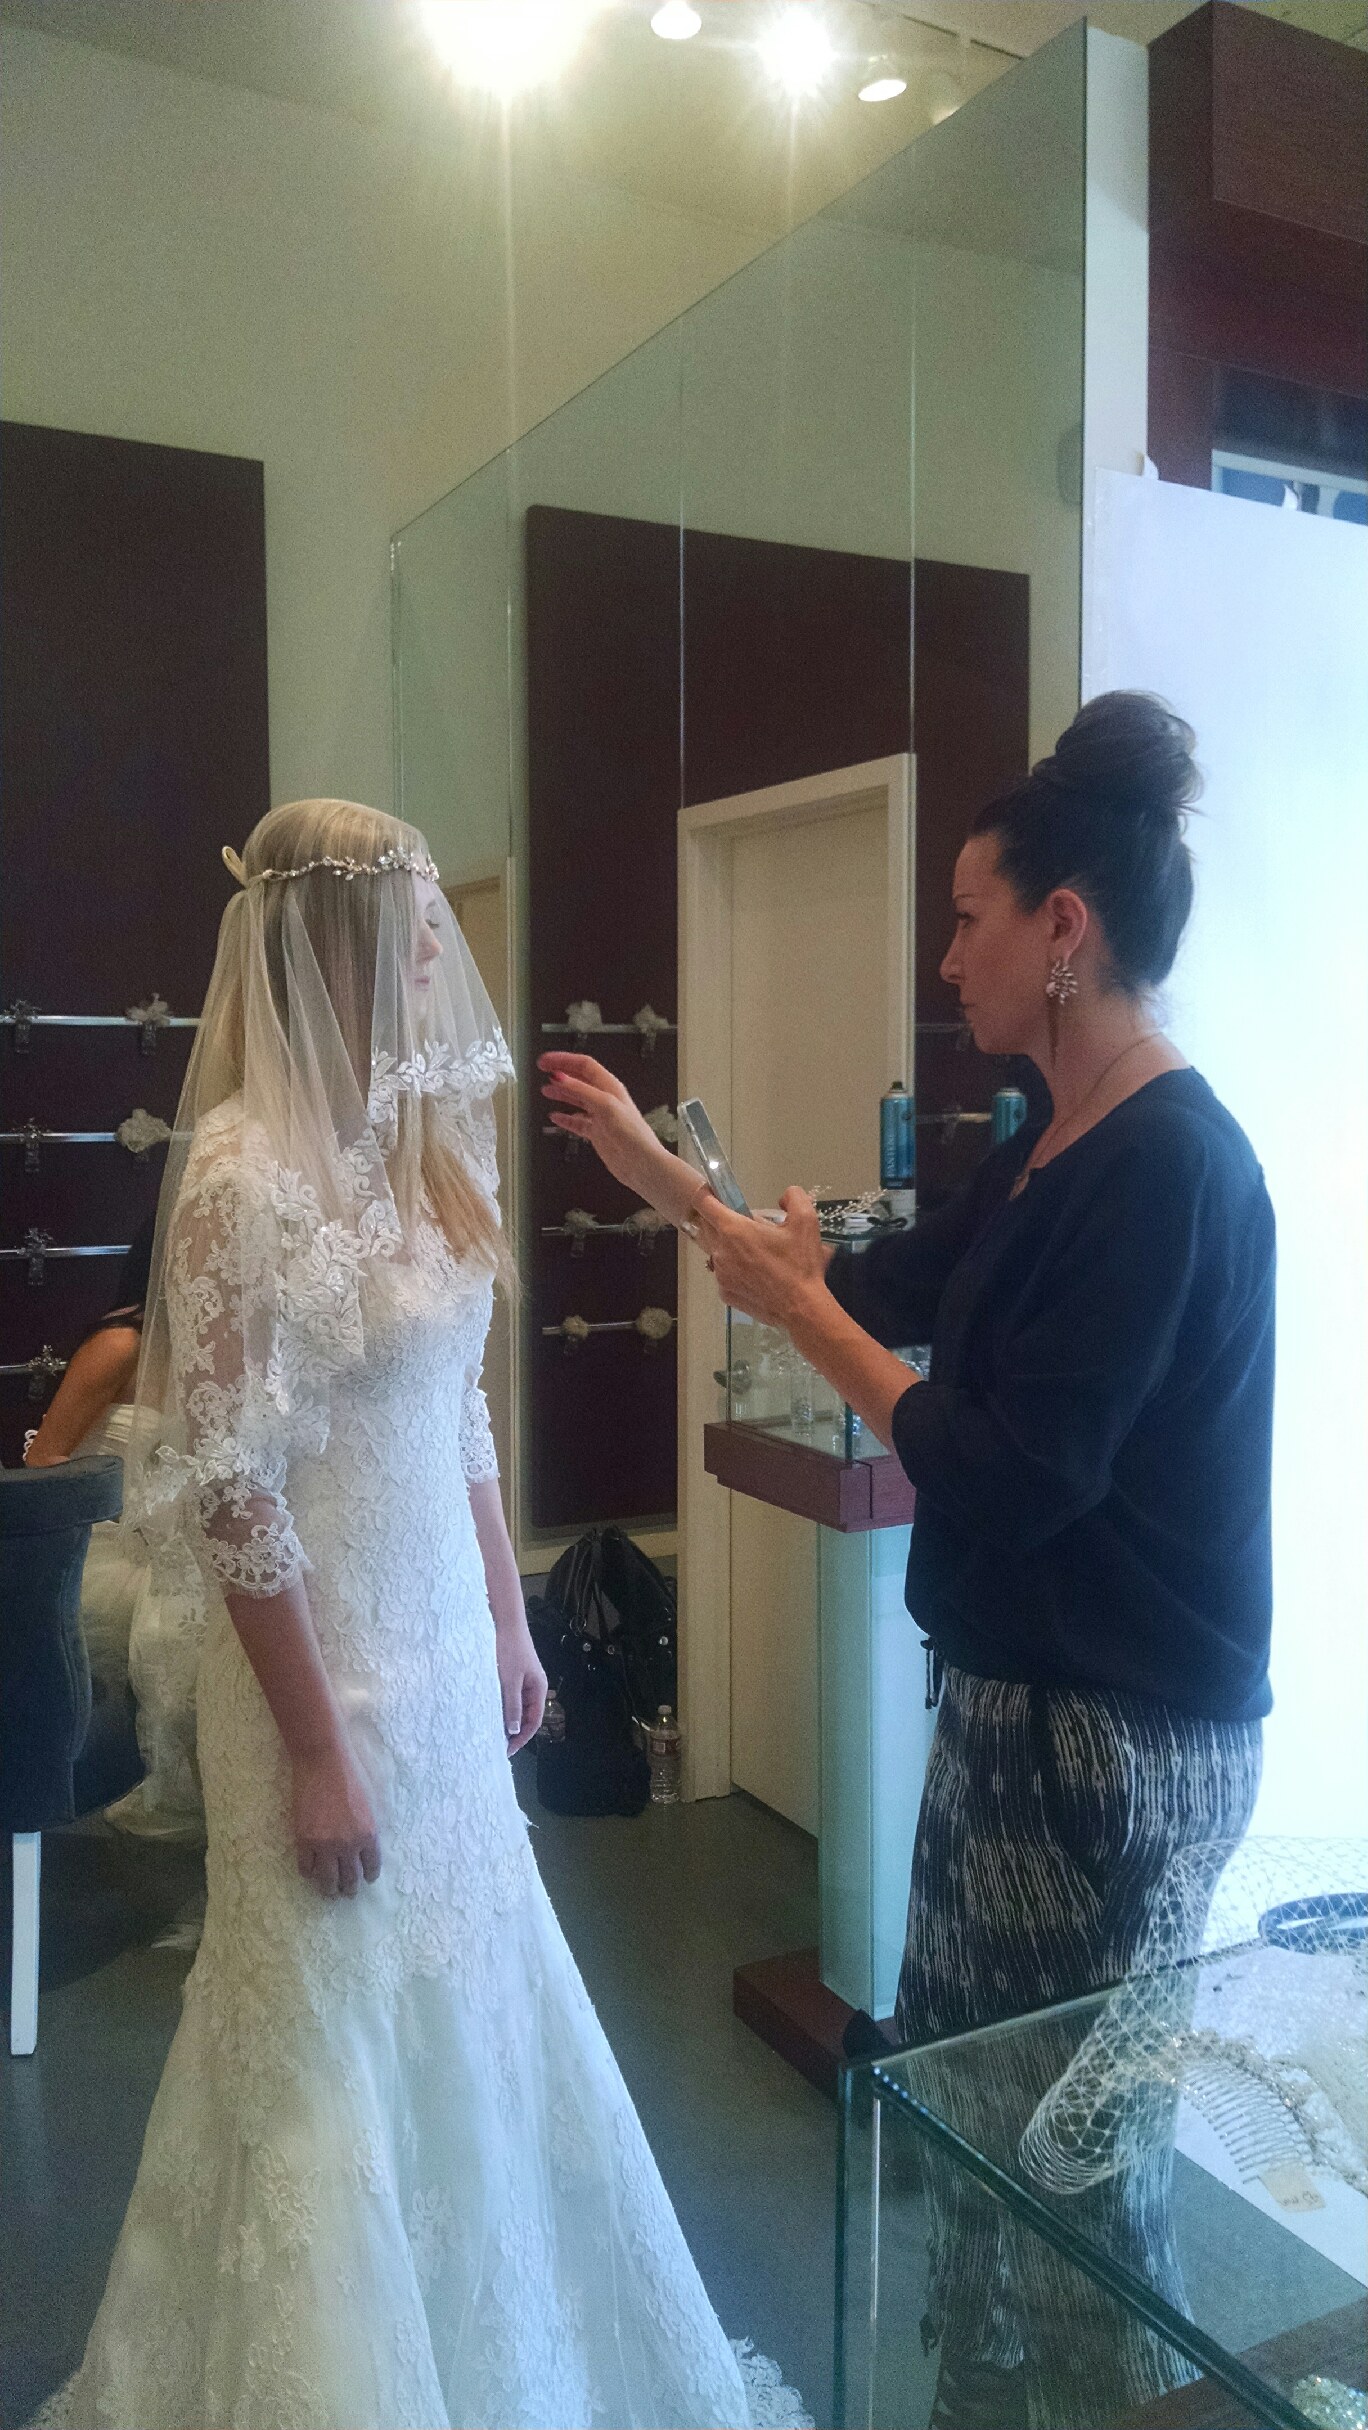 Amy going through final photo shoot prep by designer/owner Erin Cole of Erin Cole Couture Bridal.